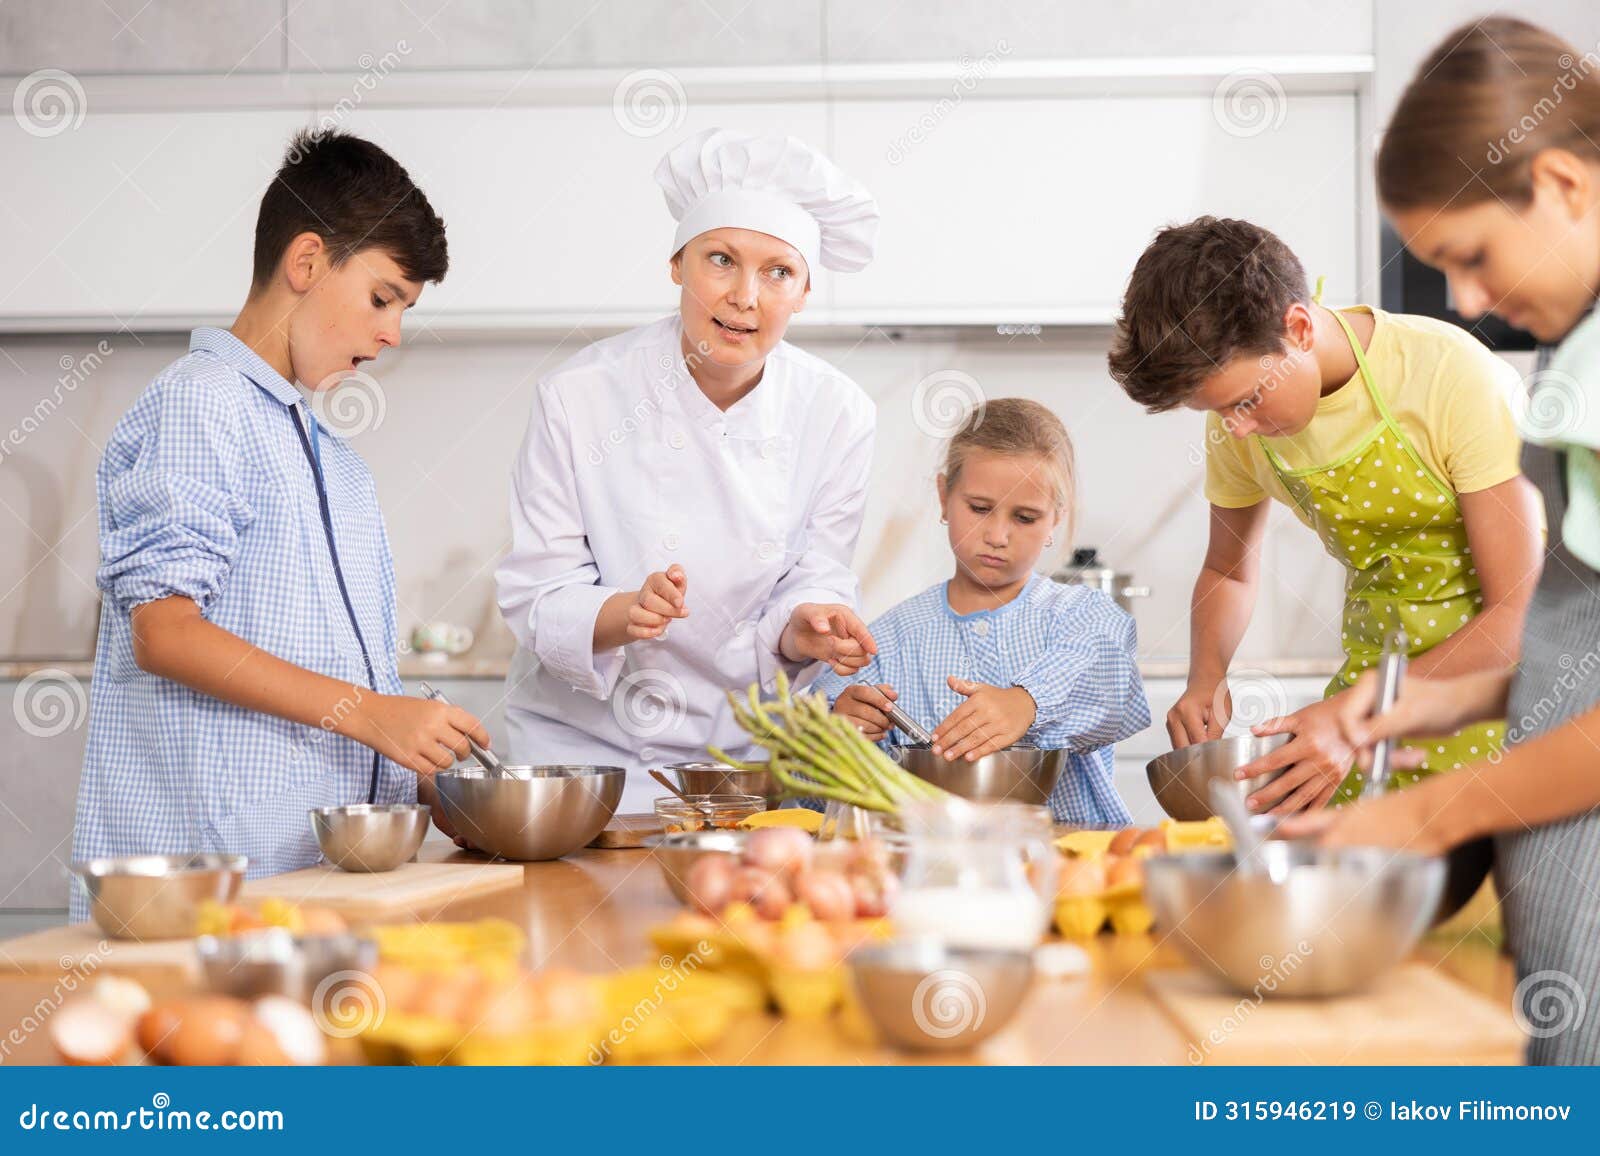 friendly female chef in white uniform giving culinary lesson to tweens